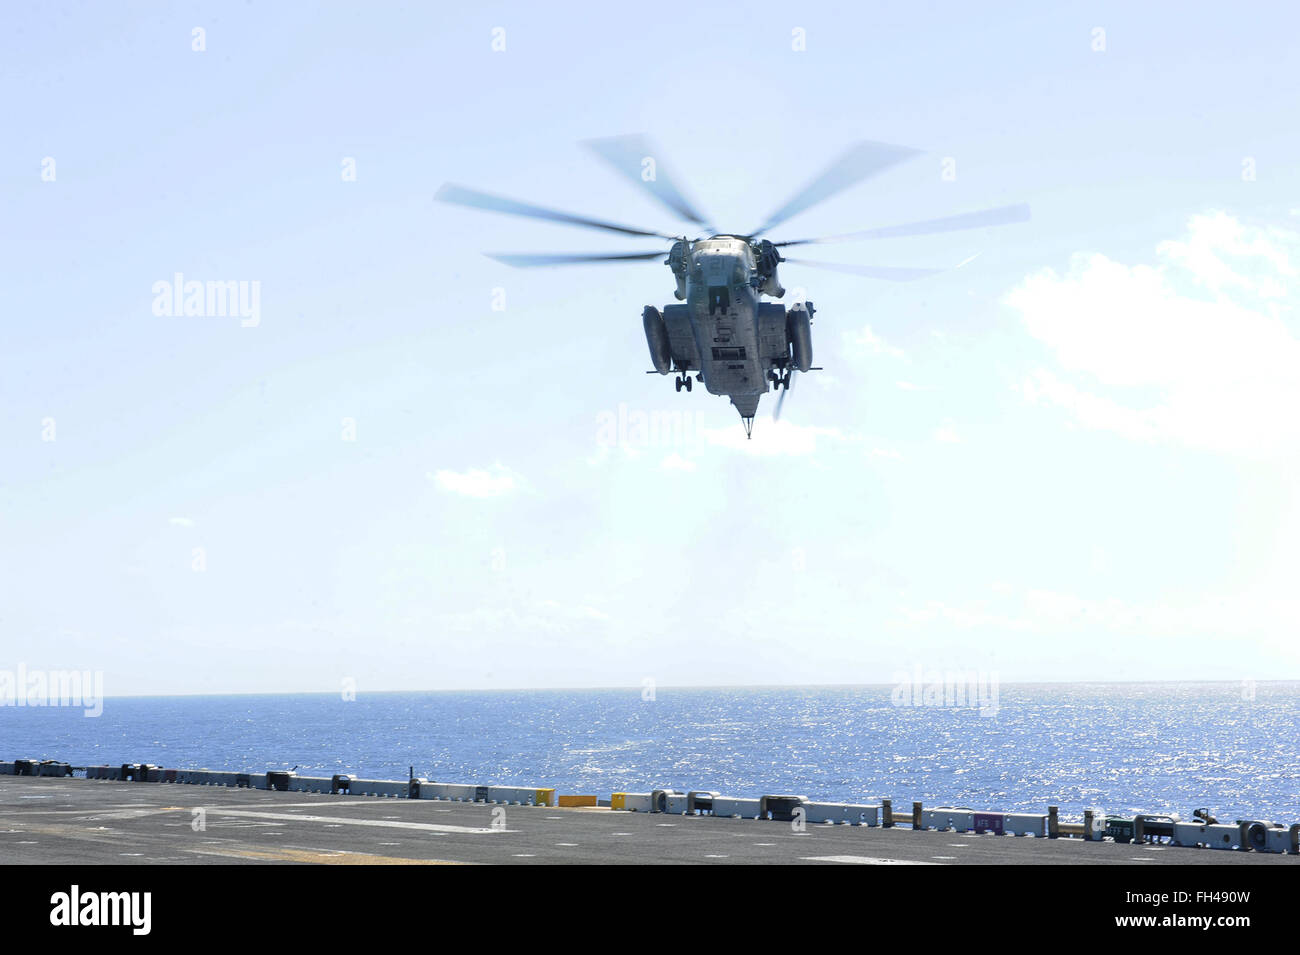 PACIFIC OCEAN (Feb. 22, 2016) A CH-53E Super Stallion, assigned to Marine Medium Tilt Rotor Squadron (VMM) 166 (Reinforced), approaches the flight deck of amphibious assault ship USS Boxer (LHD 4). More than 4,500 Sailors and Marines from Boxer Amphibious Ready Group and the 13th Marine Expeditionary Unit (13th MEU) are conducting sustainment training off the coast of Hawaii in preparation for entering the U.S. 5th and 7th Fleet areas of operations. Stock Photo